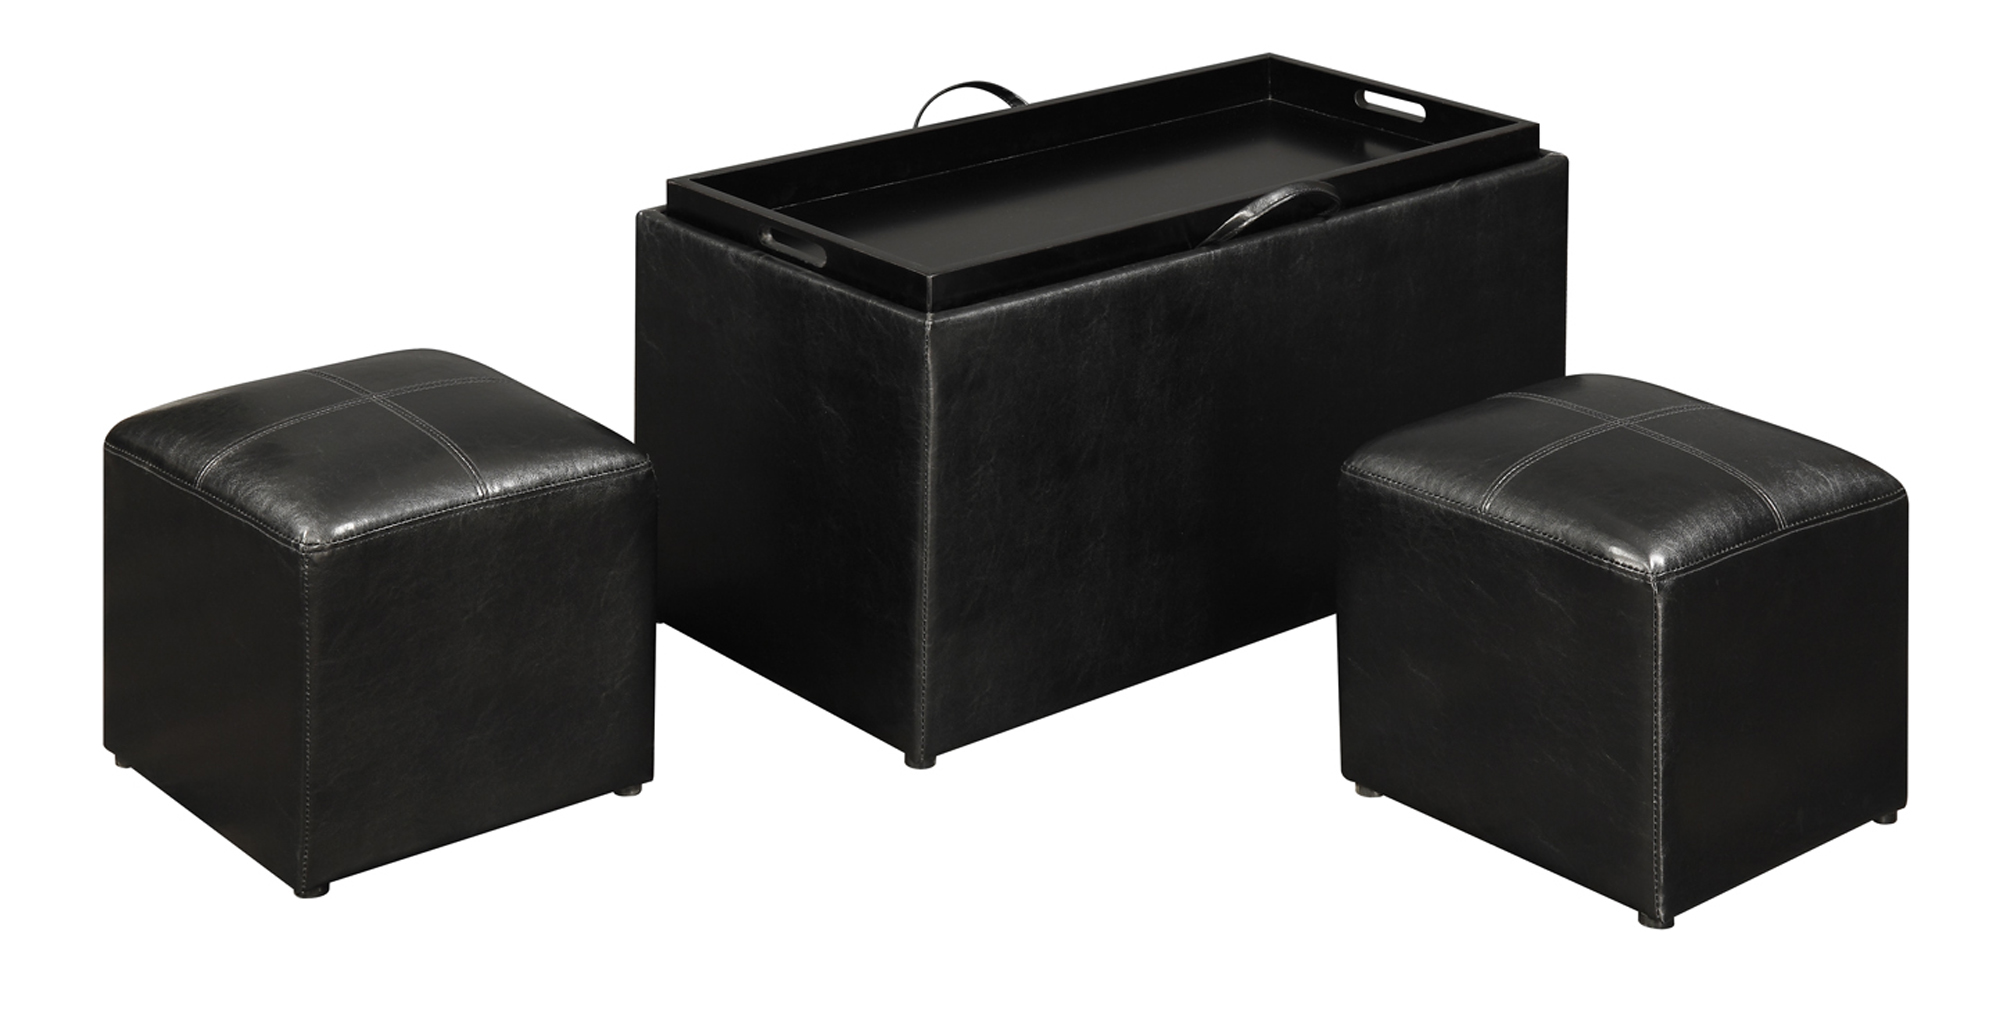 Convenience Concepts Designs4Comfort Sheridan Storage Bench with Reversible Tray and 2 Side Ottomans, Black Faux Leather - image 5 of 7